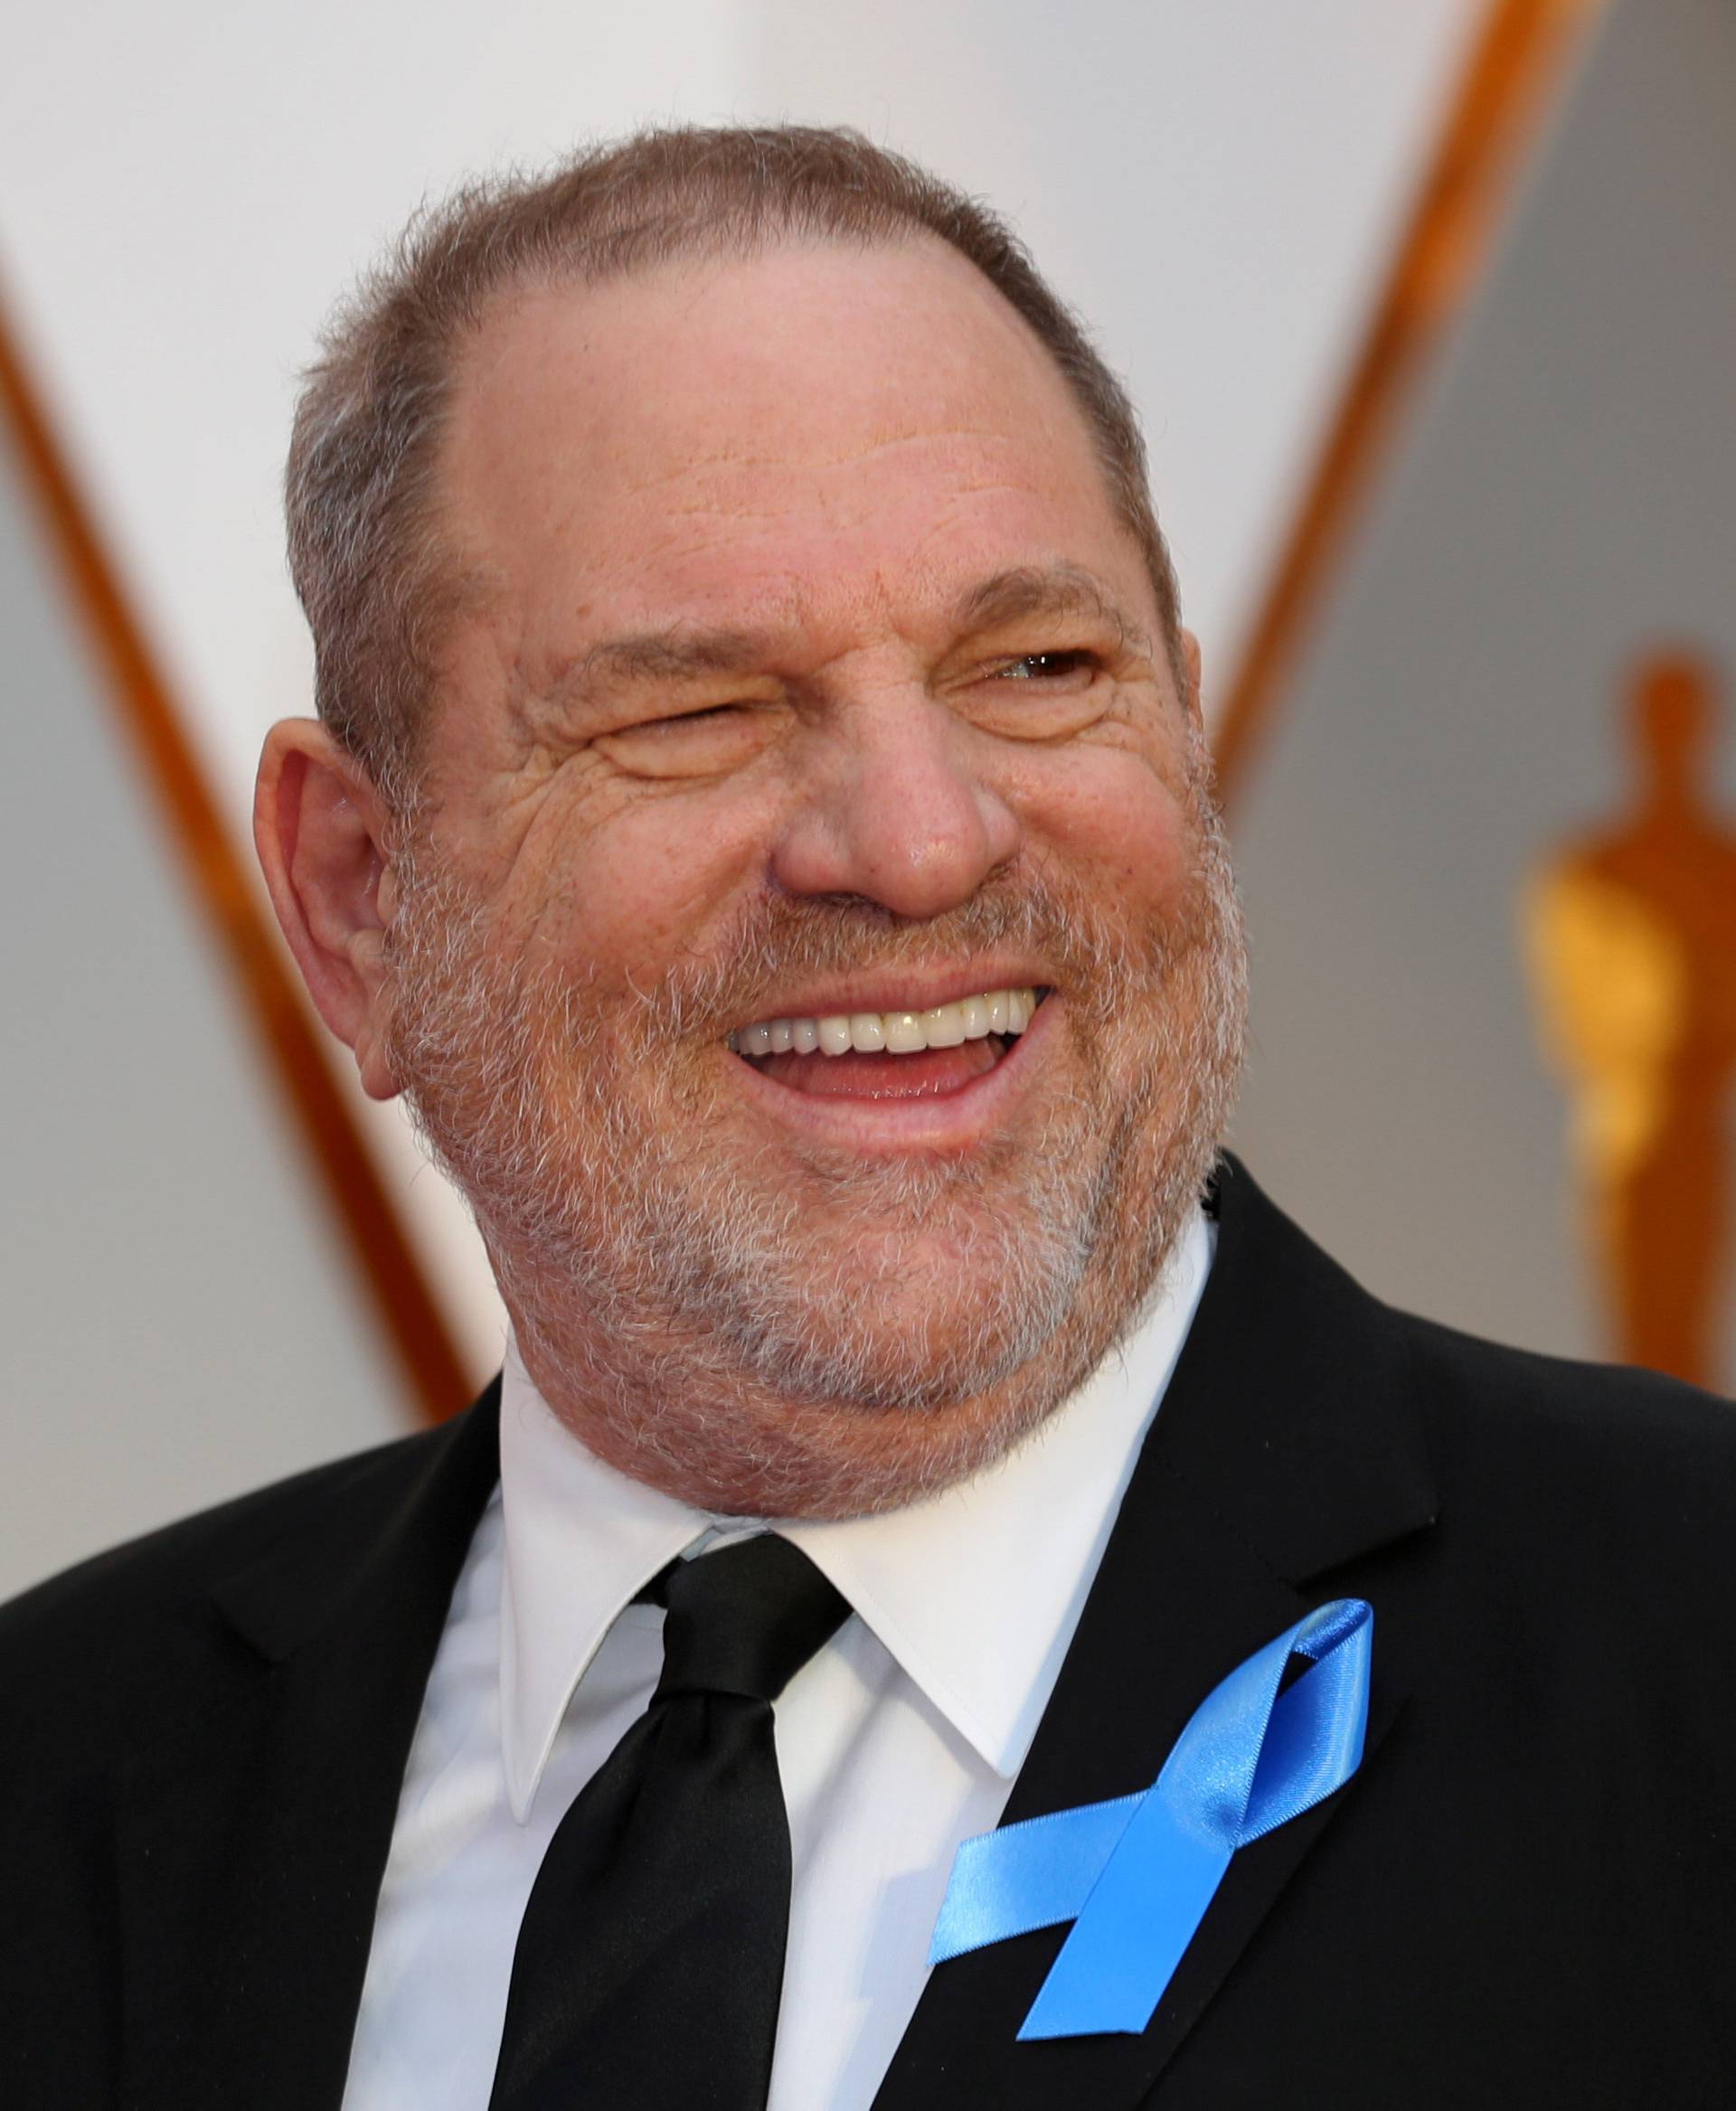 FILE PHOTO: Harvey Weinstein arrives at the 89th Academy Awards in Hollywood